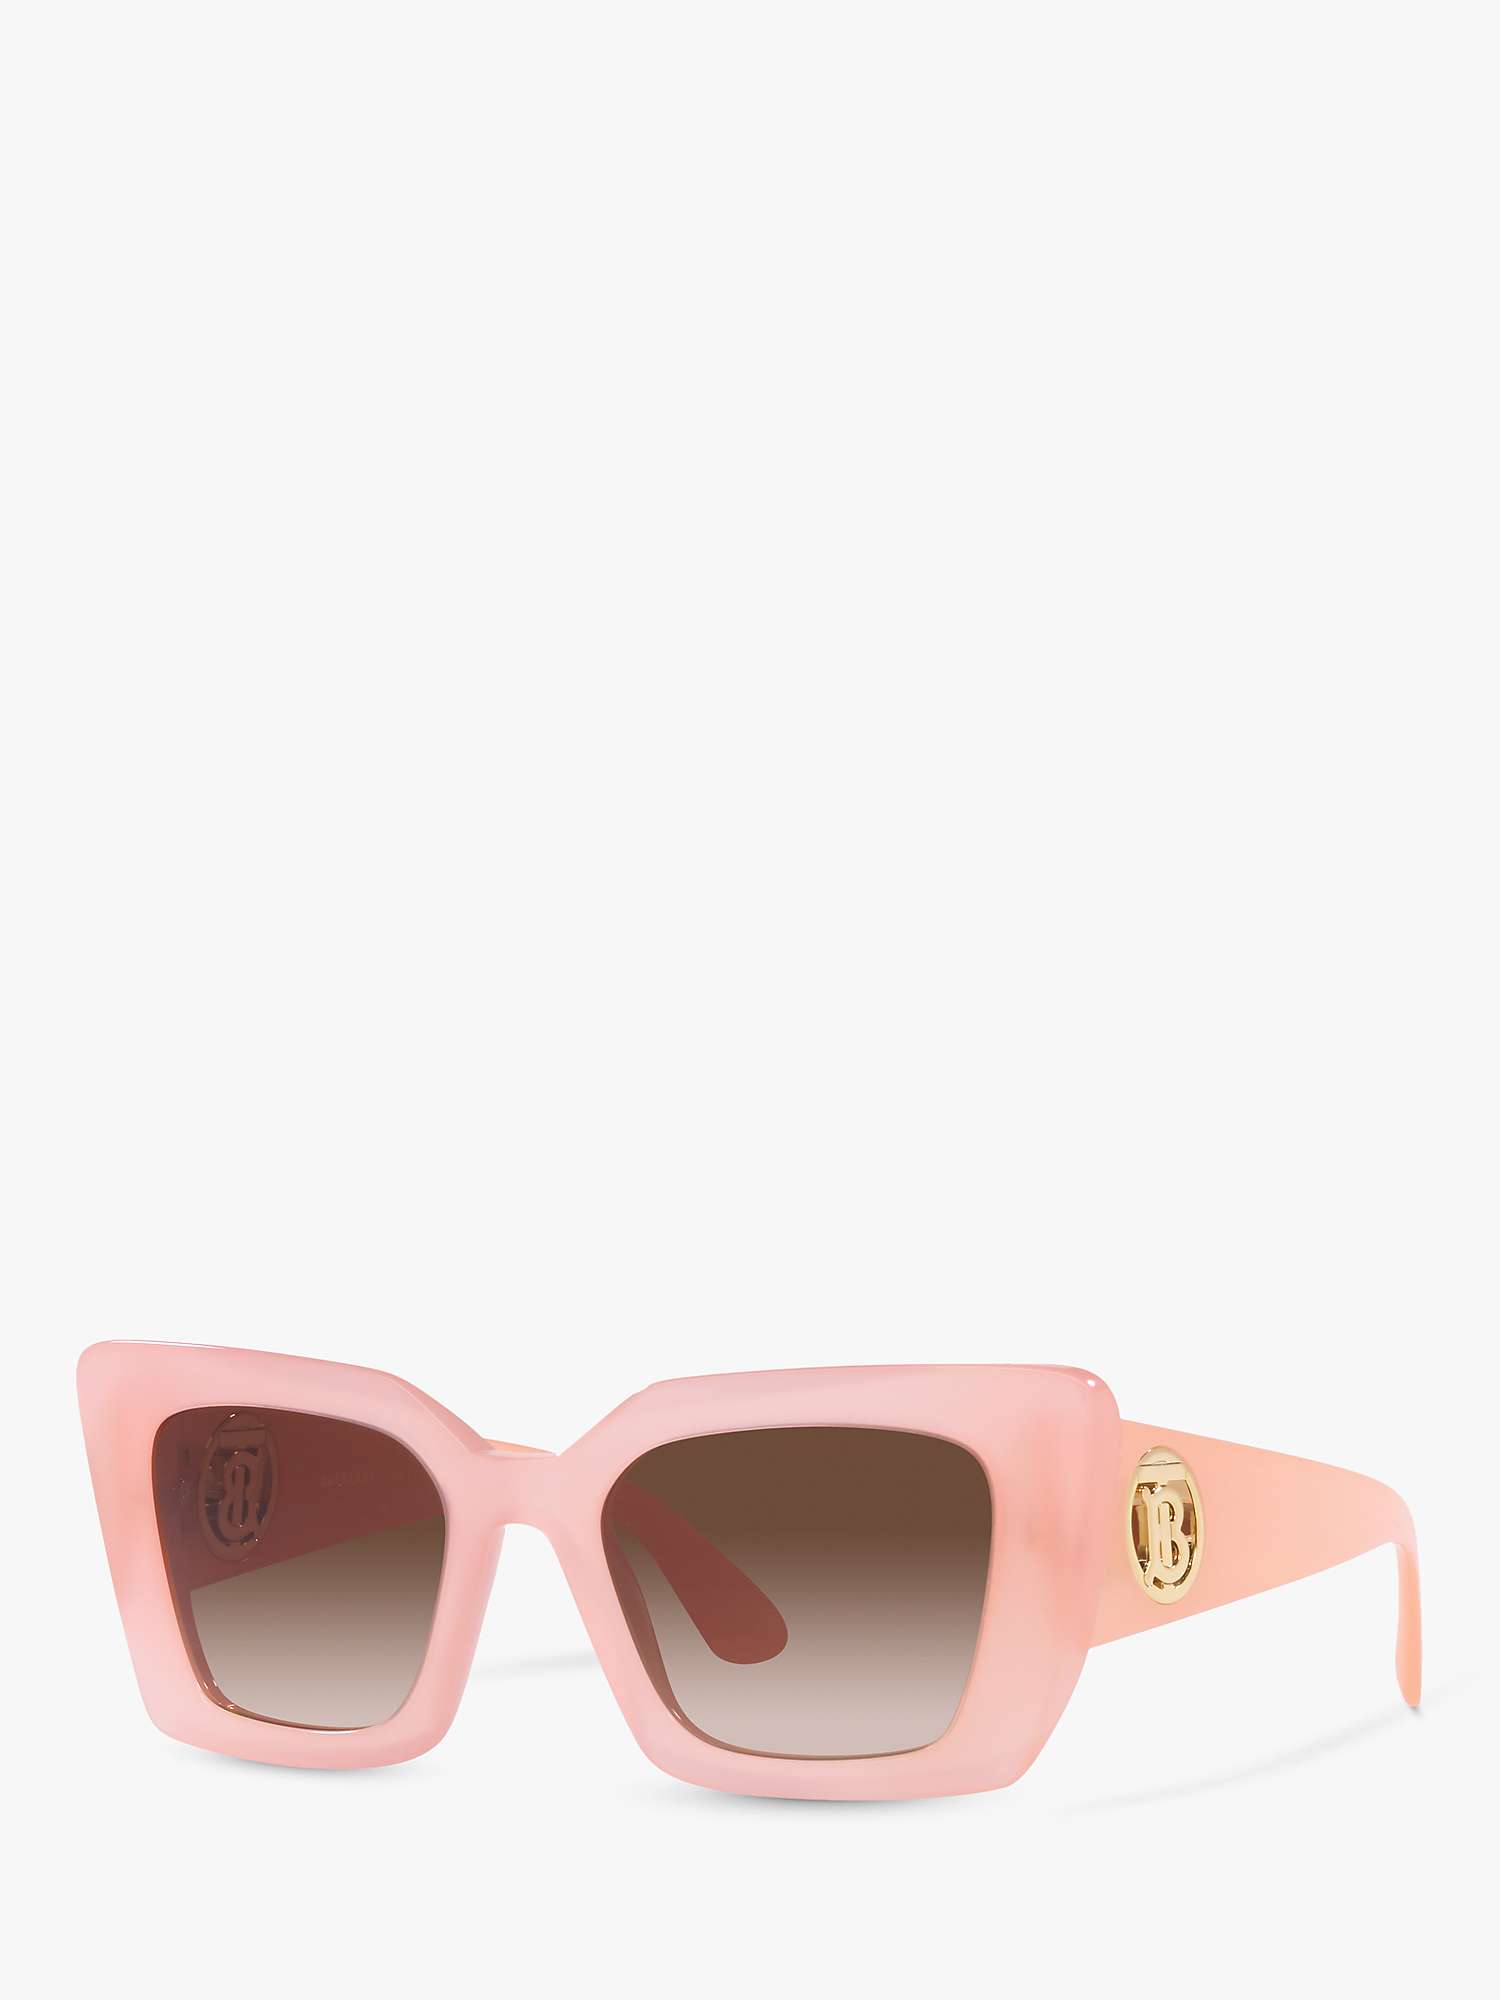 Buy Burberry BE4344 Women's Square Sunglasses, Pink/Brown Gradient Online at johnlewis.com